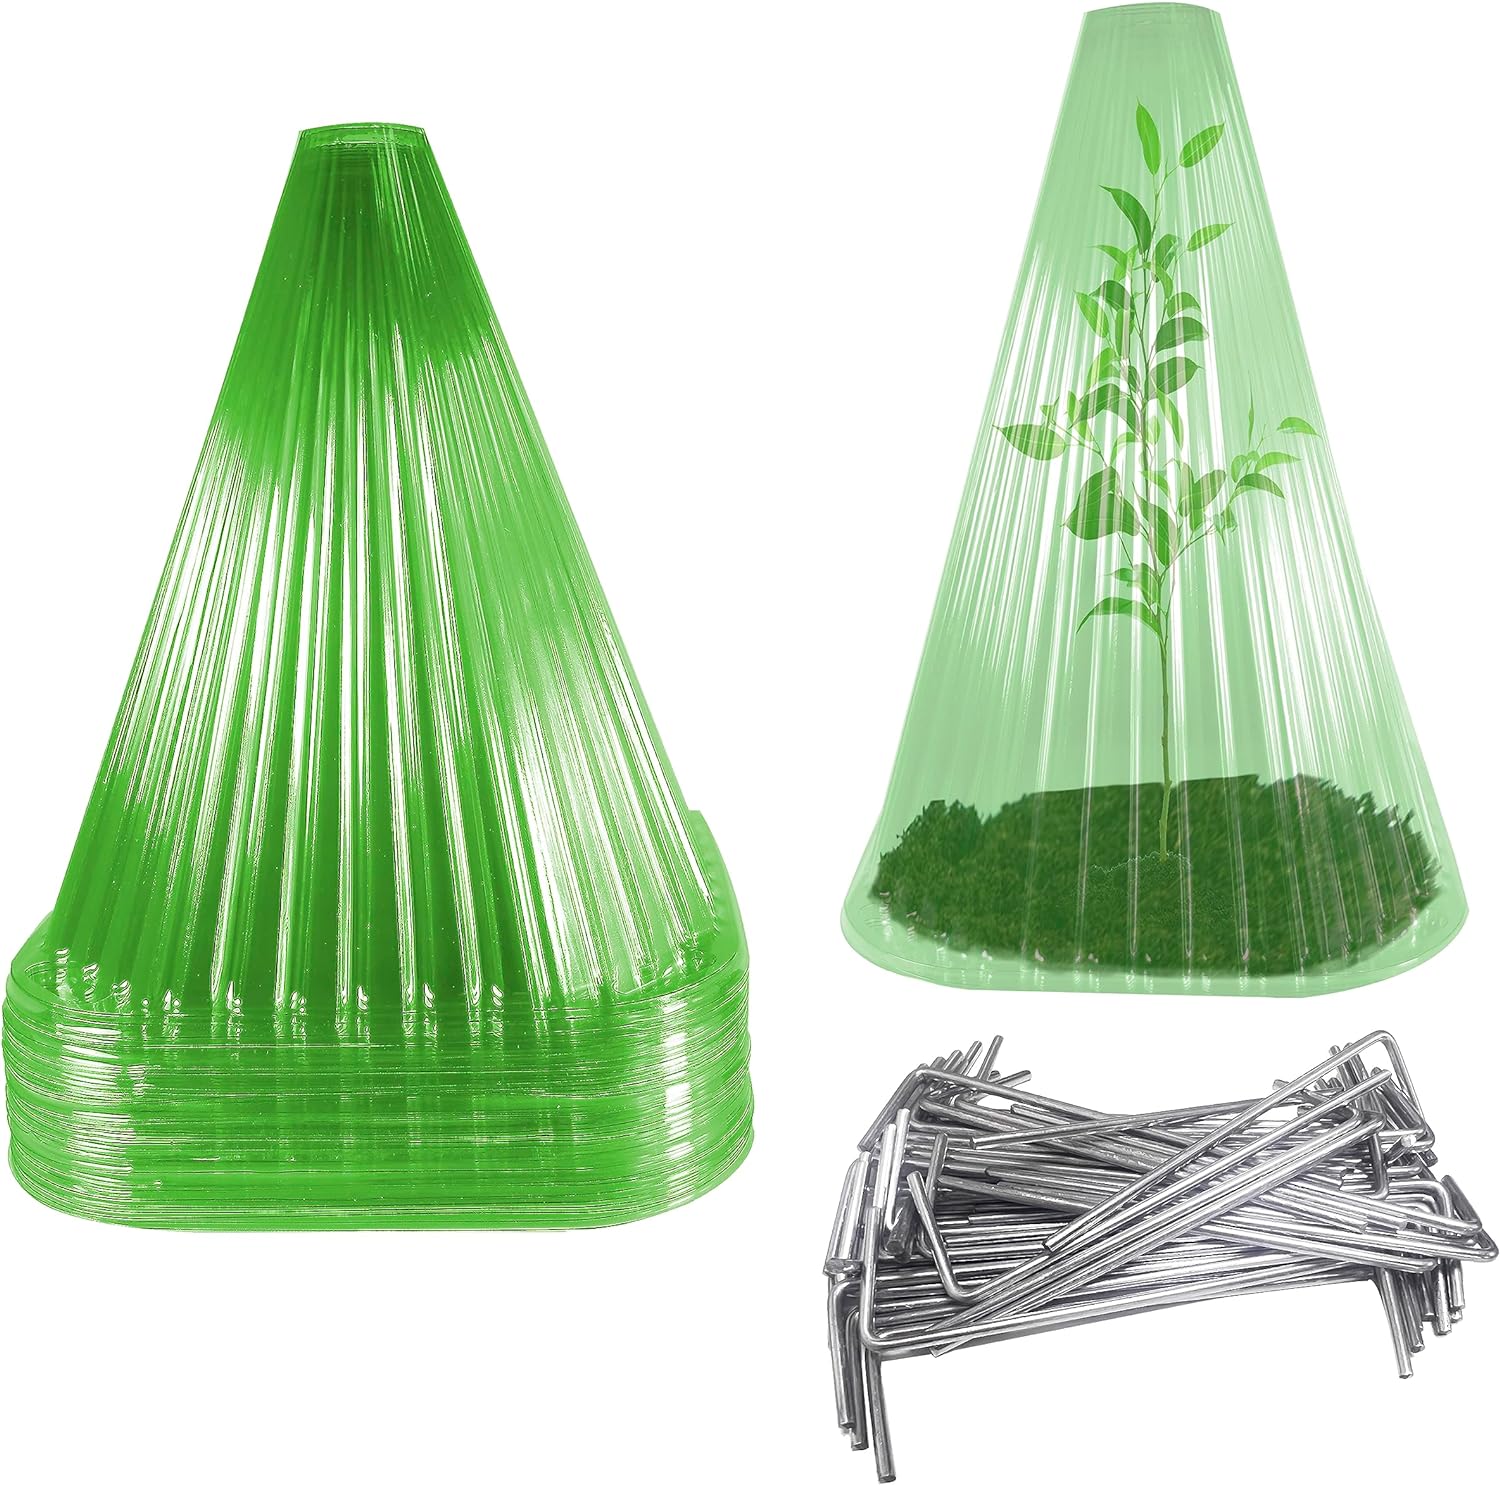 Ljliudu 30 Pack Garden Cloches for Plants,Plant Protection 7.67 * 8.66 Inches, Reusable Plant Bell Covers, Plant Covers Protect Plants from Freeze Weather